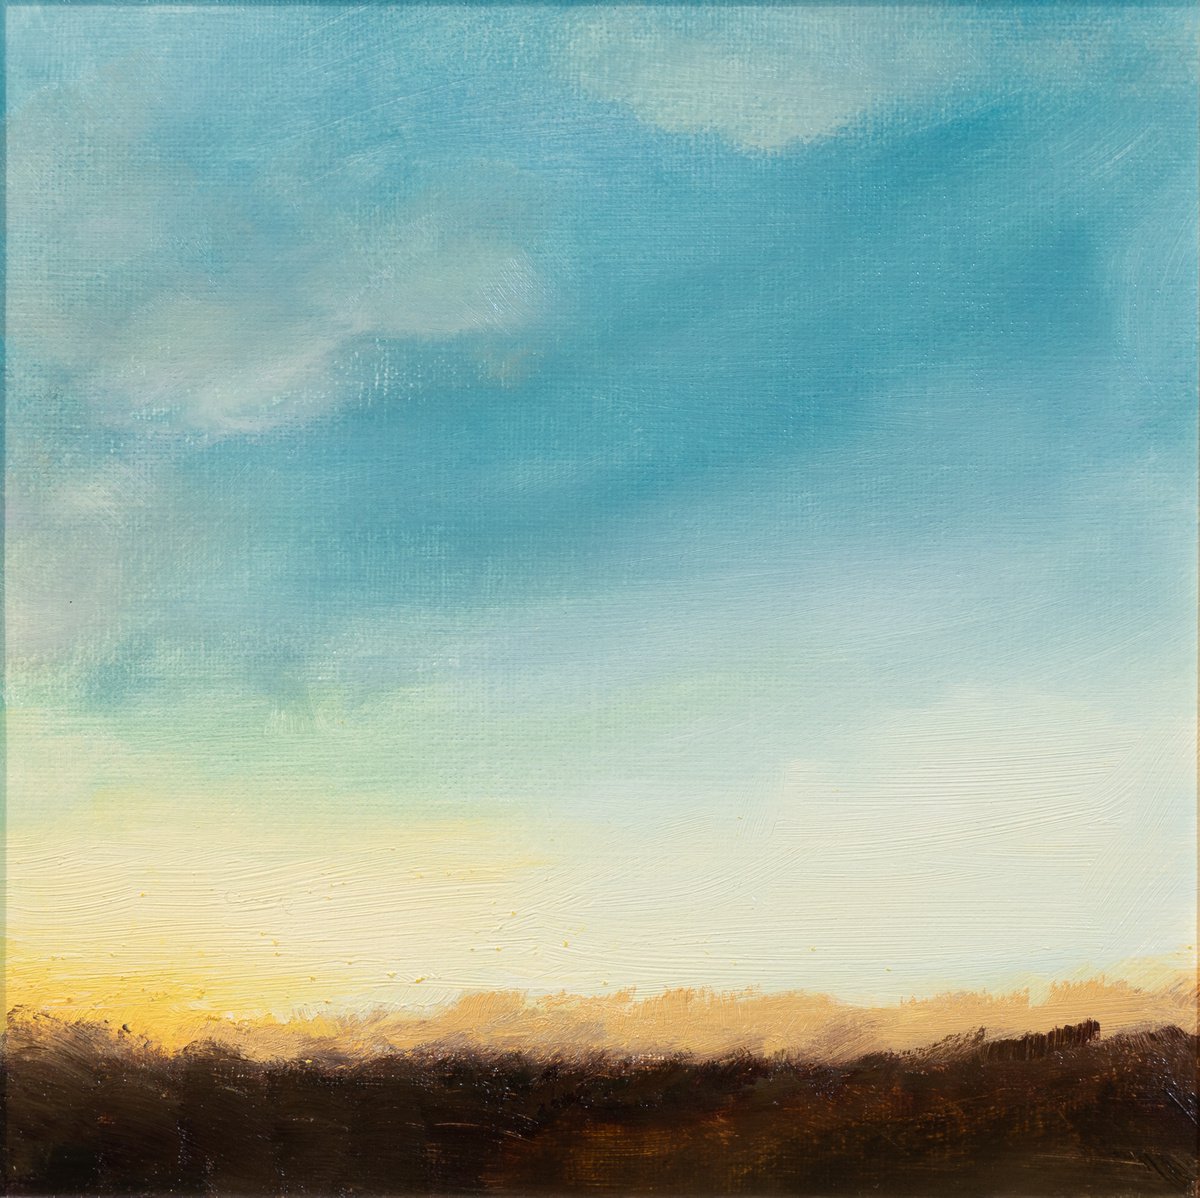 Dawn - landscape - Small size affordable art - Ideal decoration - Ready to frame by Fabienne Monestier